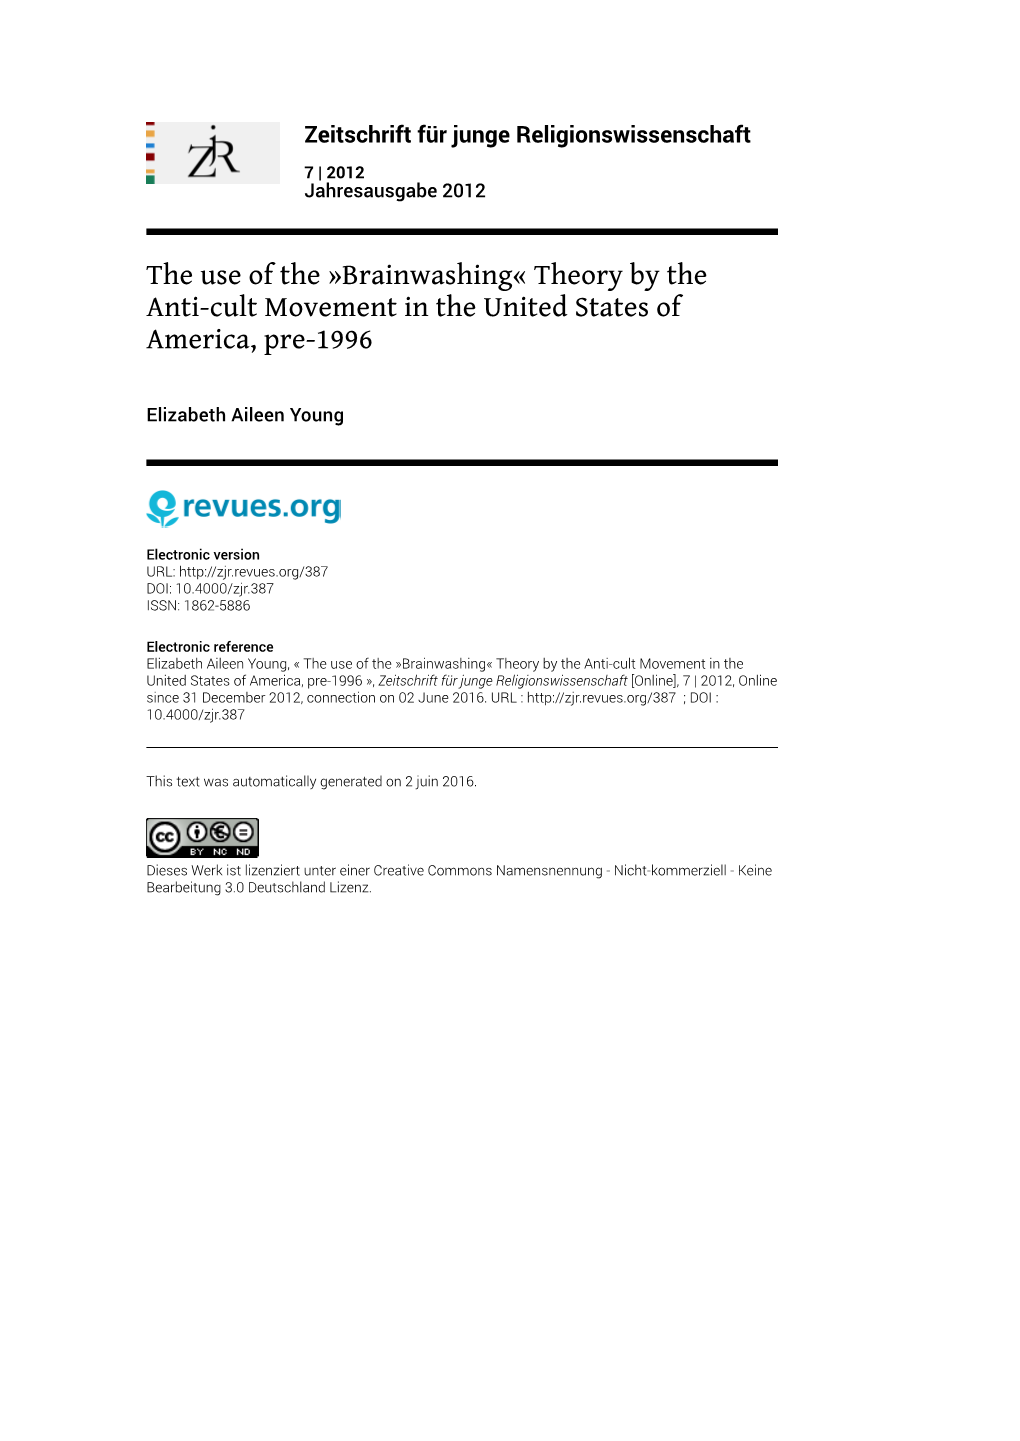 The Use of The» Brainwashing «Theory by the Anti-Cult Movement In